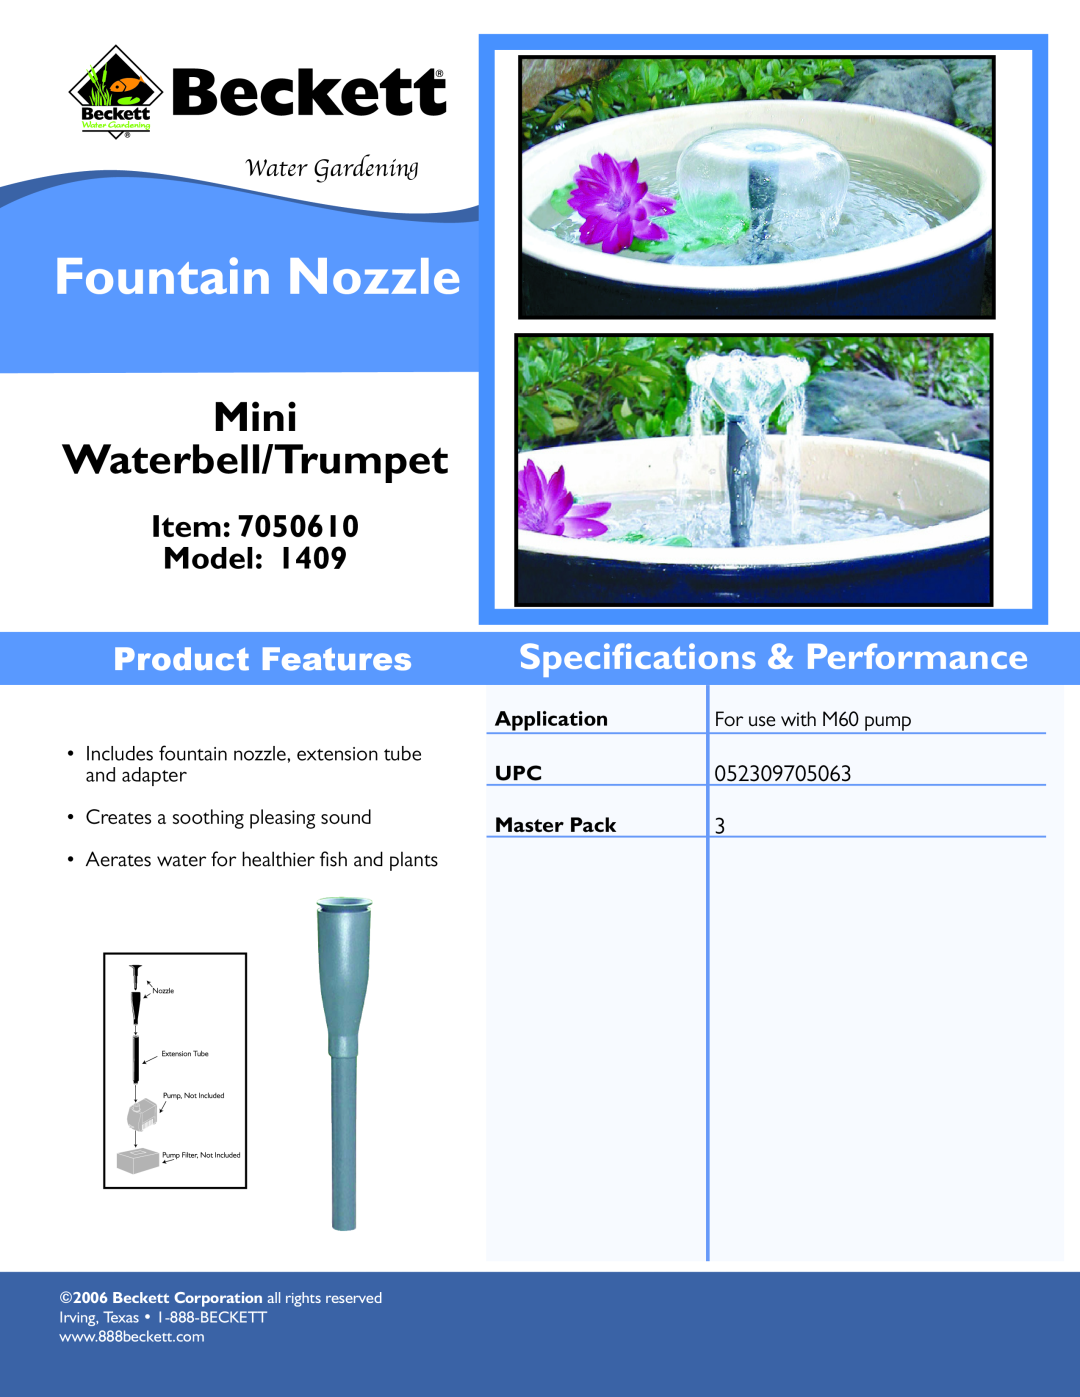 Beckett Water Gardening 1409 specifications Fountain Nozzle, Mini Waterbell/Trumpet, Speciﬁcations & Performance 